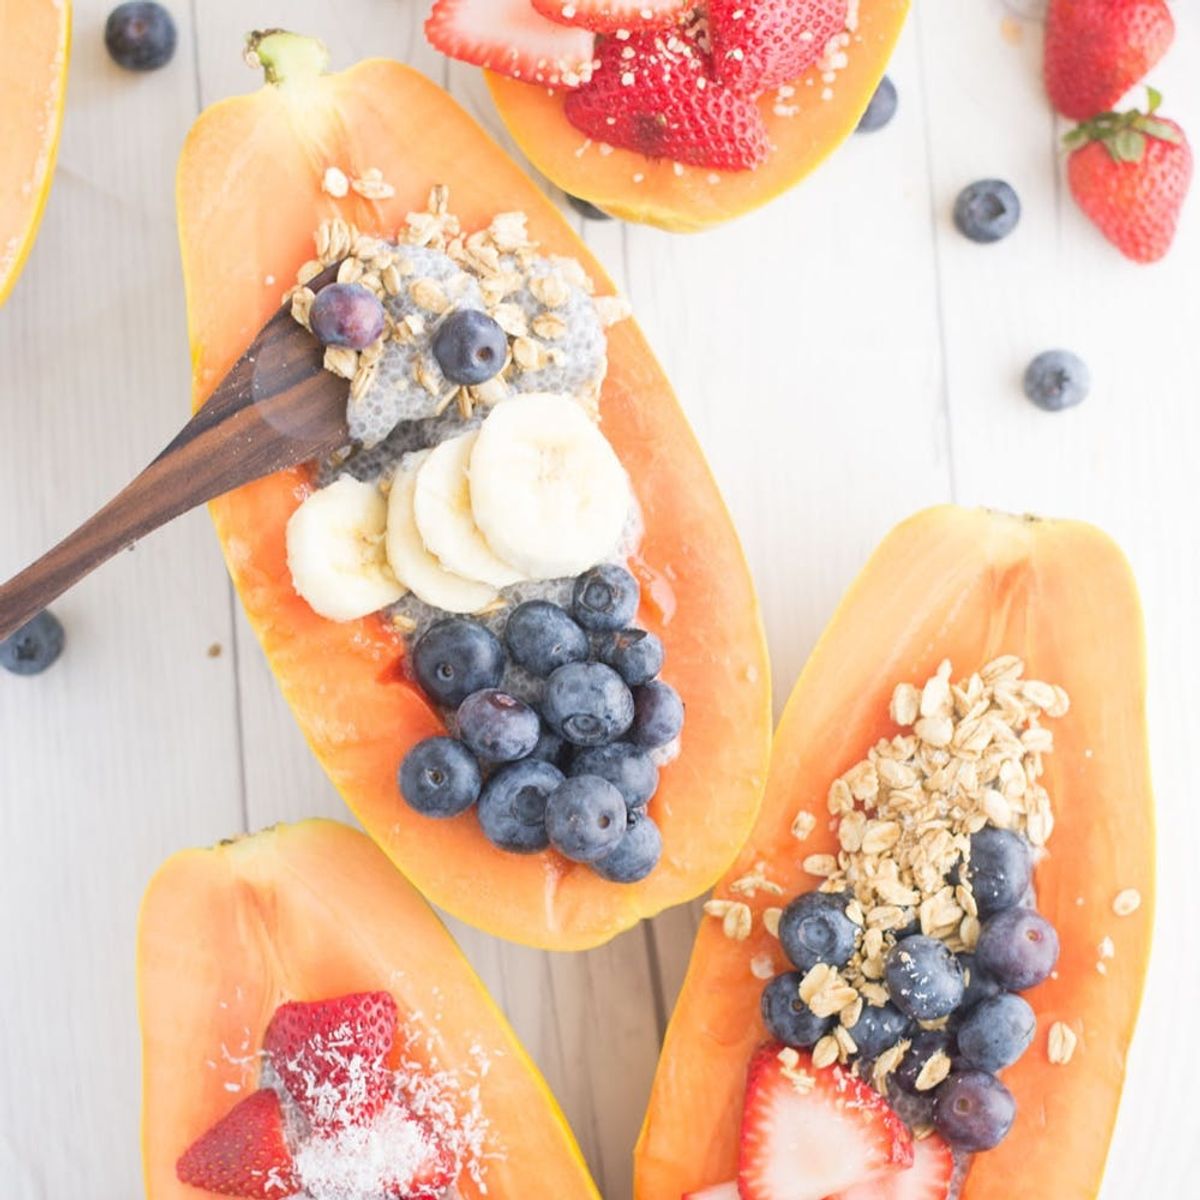 Add a Tropical Twist to Your Breakfast With Papaya Boats and Chia Pudding